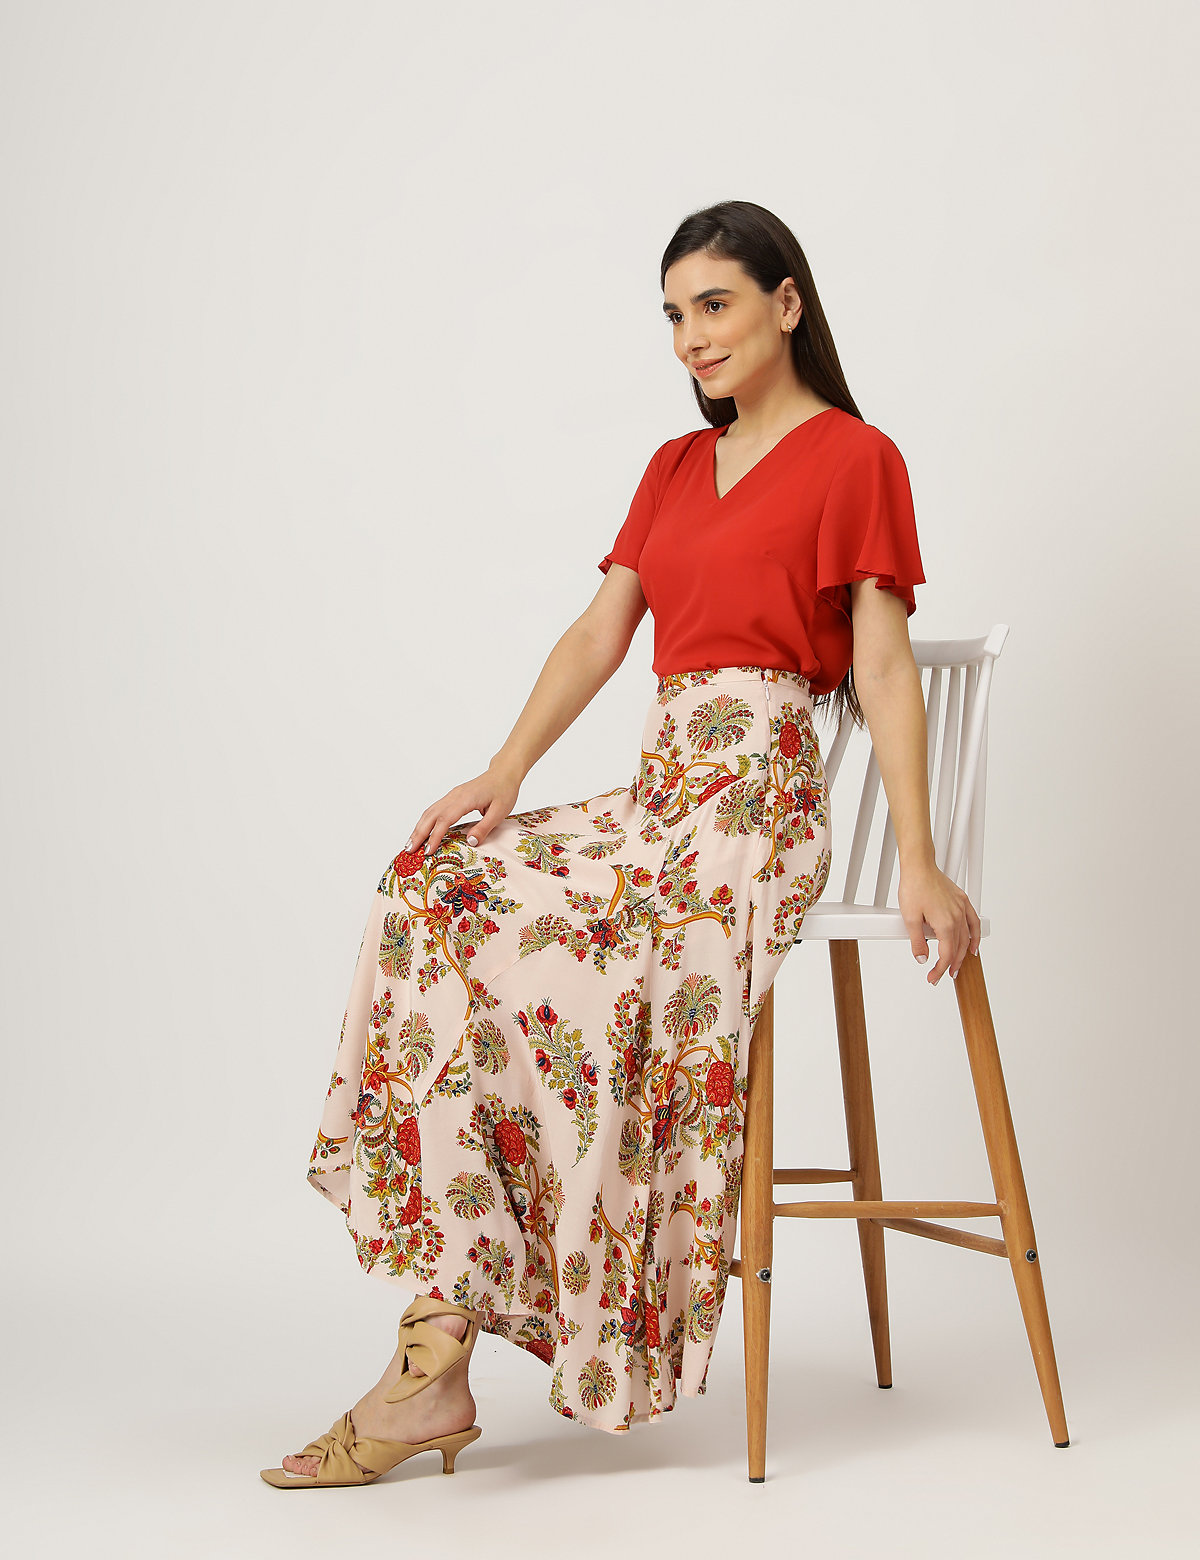 Pure Viscose Floral Print Flared Skirt